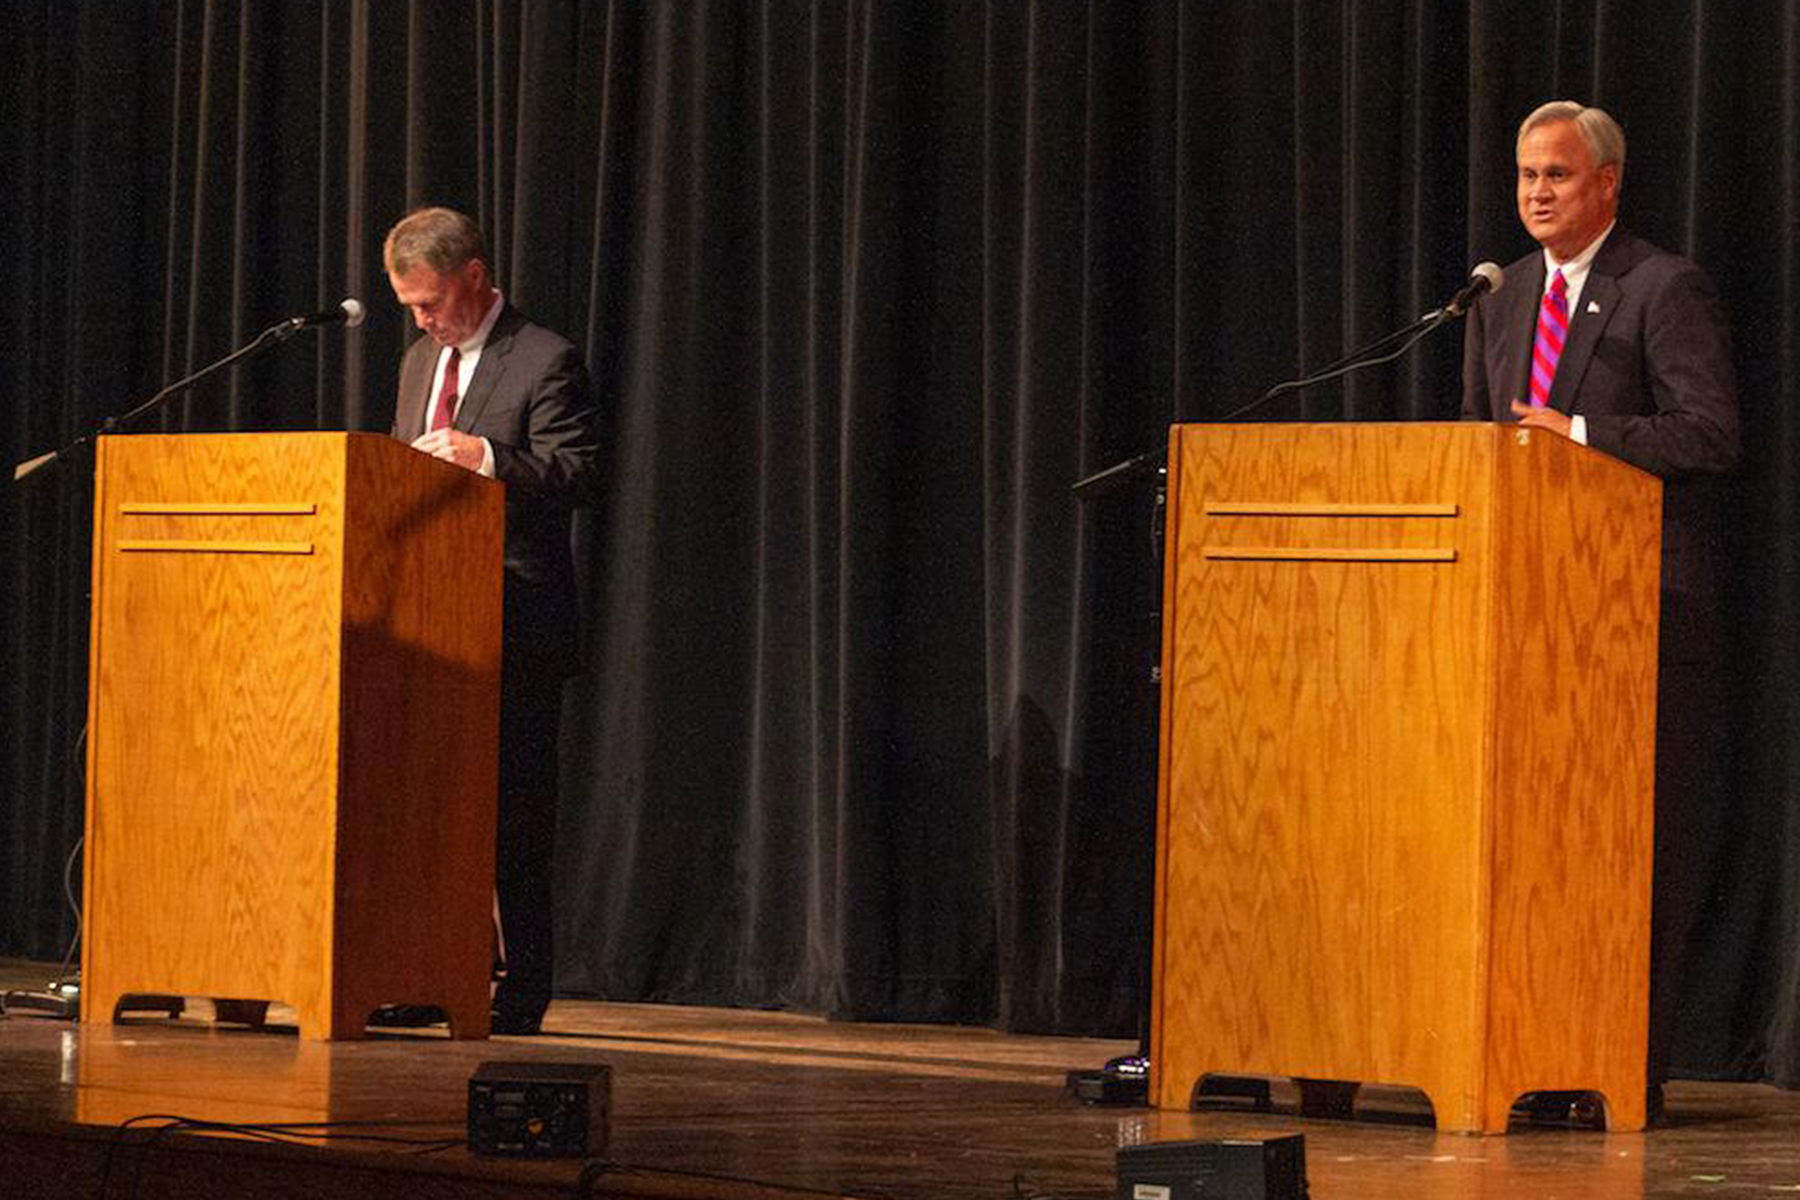 Mayor Joe Hogsett (left) and state Sen. Jim Merritt (right) participated in what is believed to be the first mayoral debate about Black issues in Indianapolis. (Photo by: Tyler Fenwick)